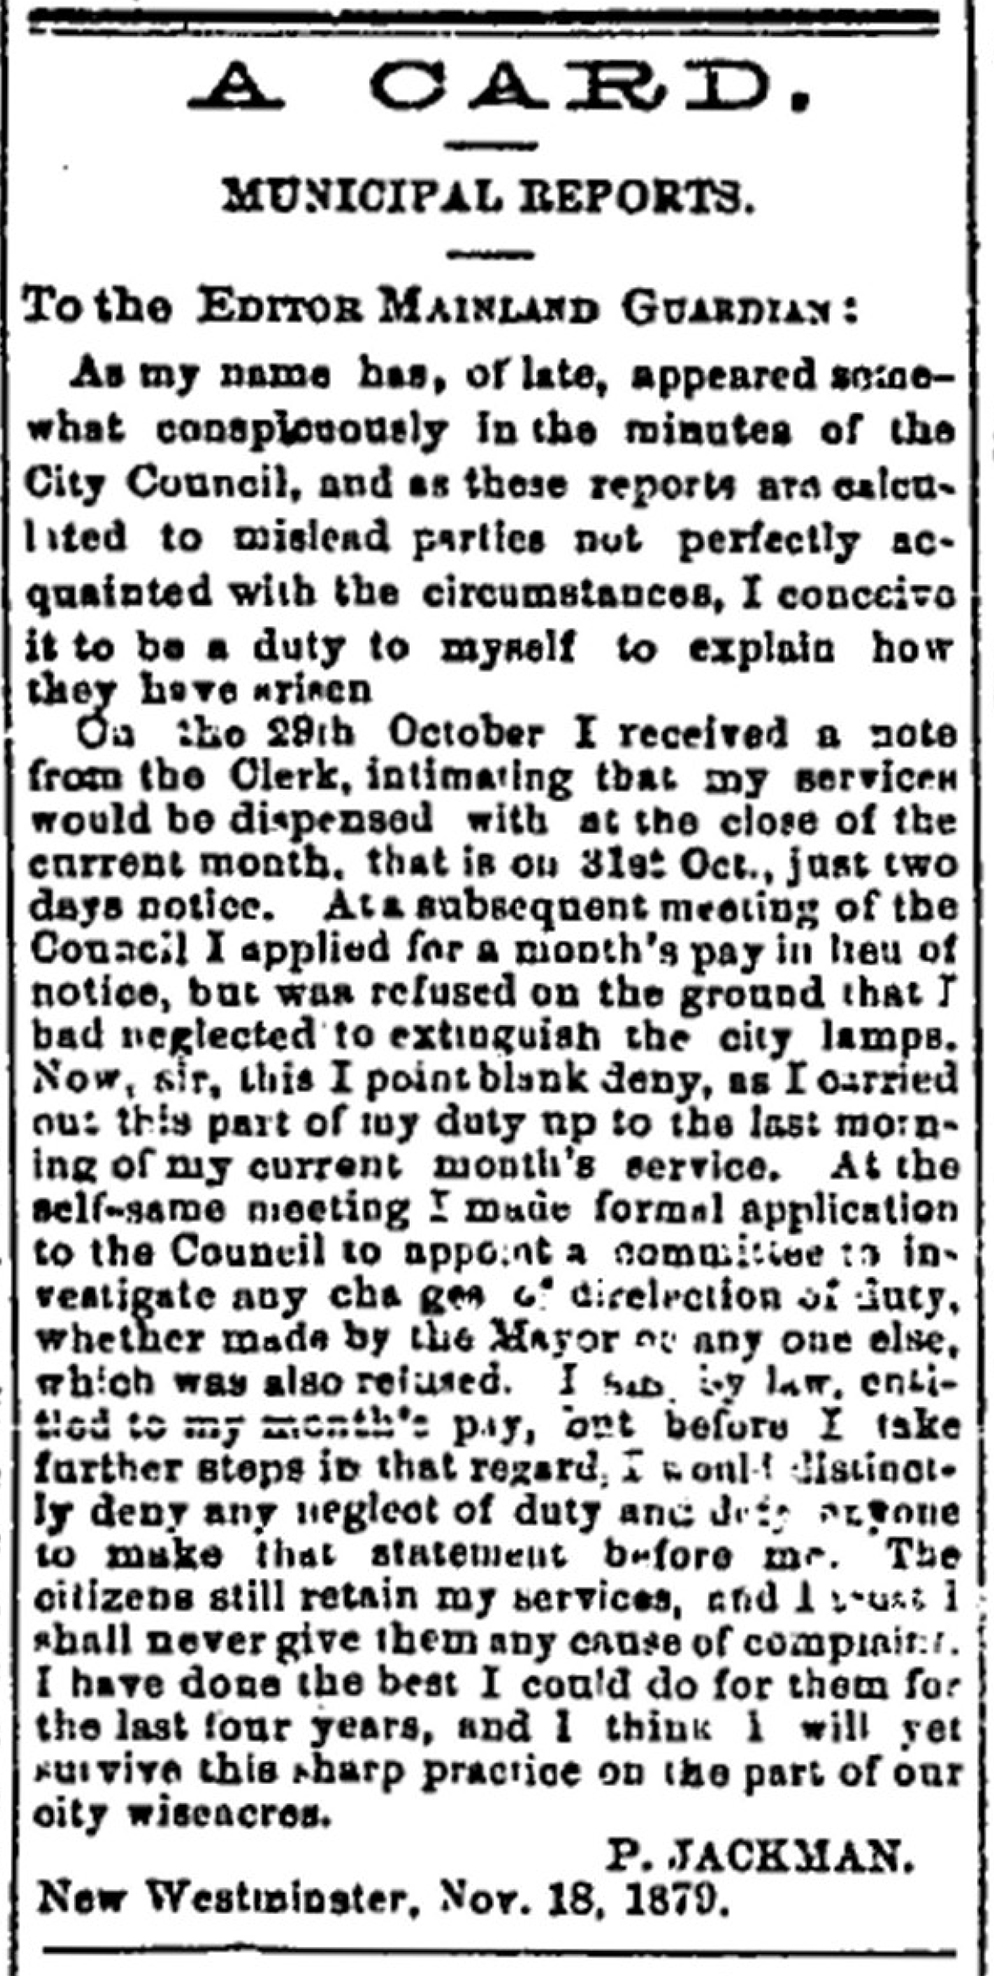 A newspaper clipping of an article from the Mainland Guardian that consists of a letter written by Philip Jackman on November 18, 1879. In the letter, Jackman contests the City Council’s decision to not grant him one month’s pay for his termination as night watchman and lamp lighter.